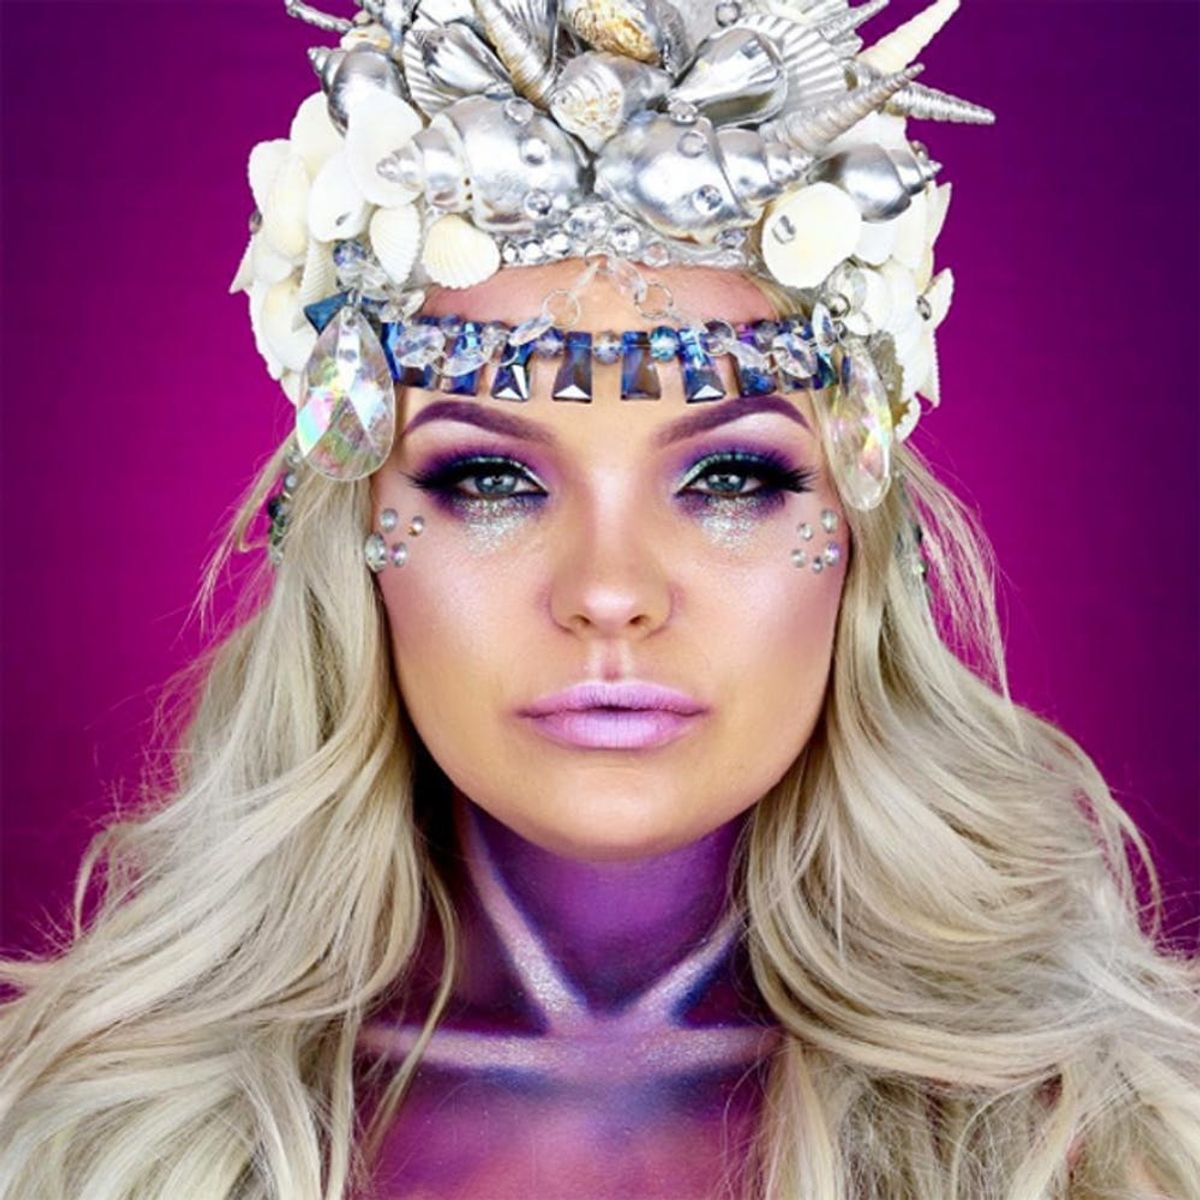 Transform into a Mermaid With This Ghoulish Glam Halloween Makeup Tutorial